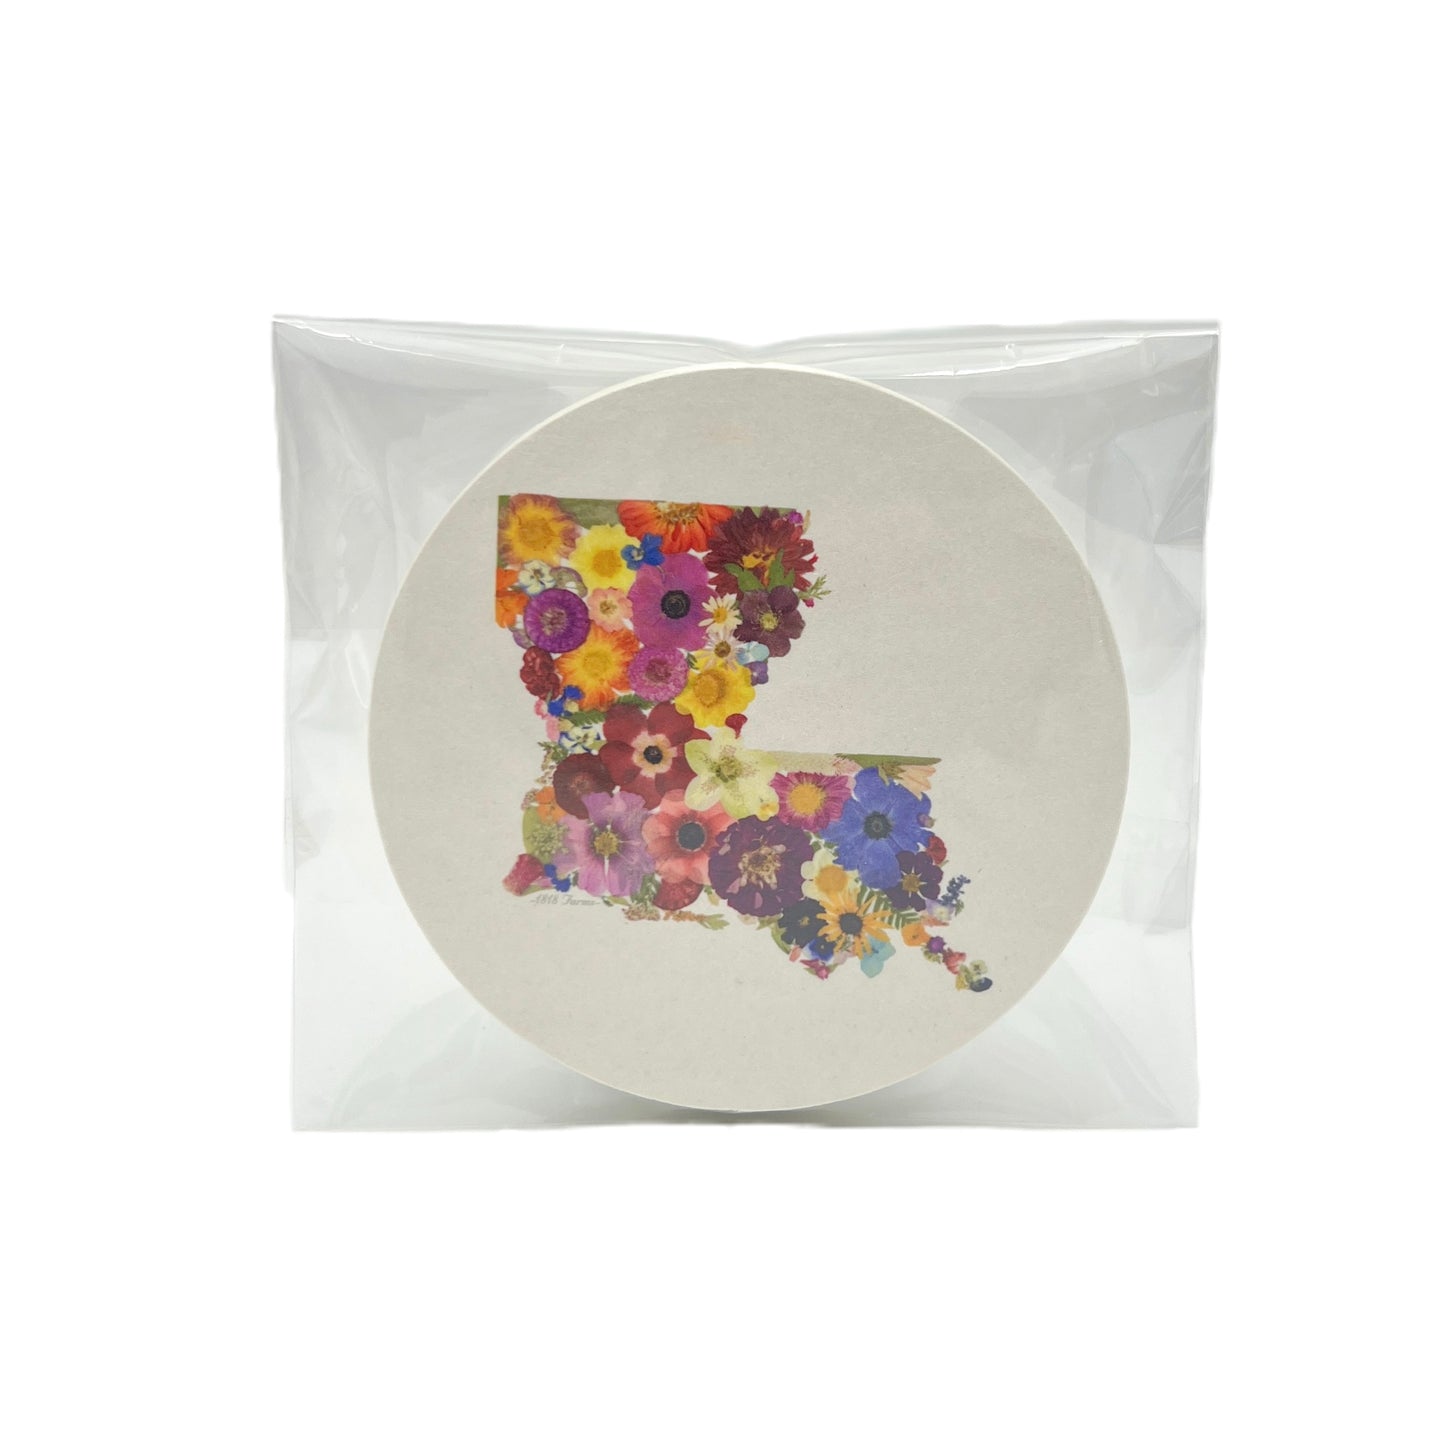 Louisiana Themed Coasters (Set of 6) Featuring Dried, Pressed Flowers - "Where I Bloom" Collection Coaster 1818 Farms   